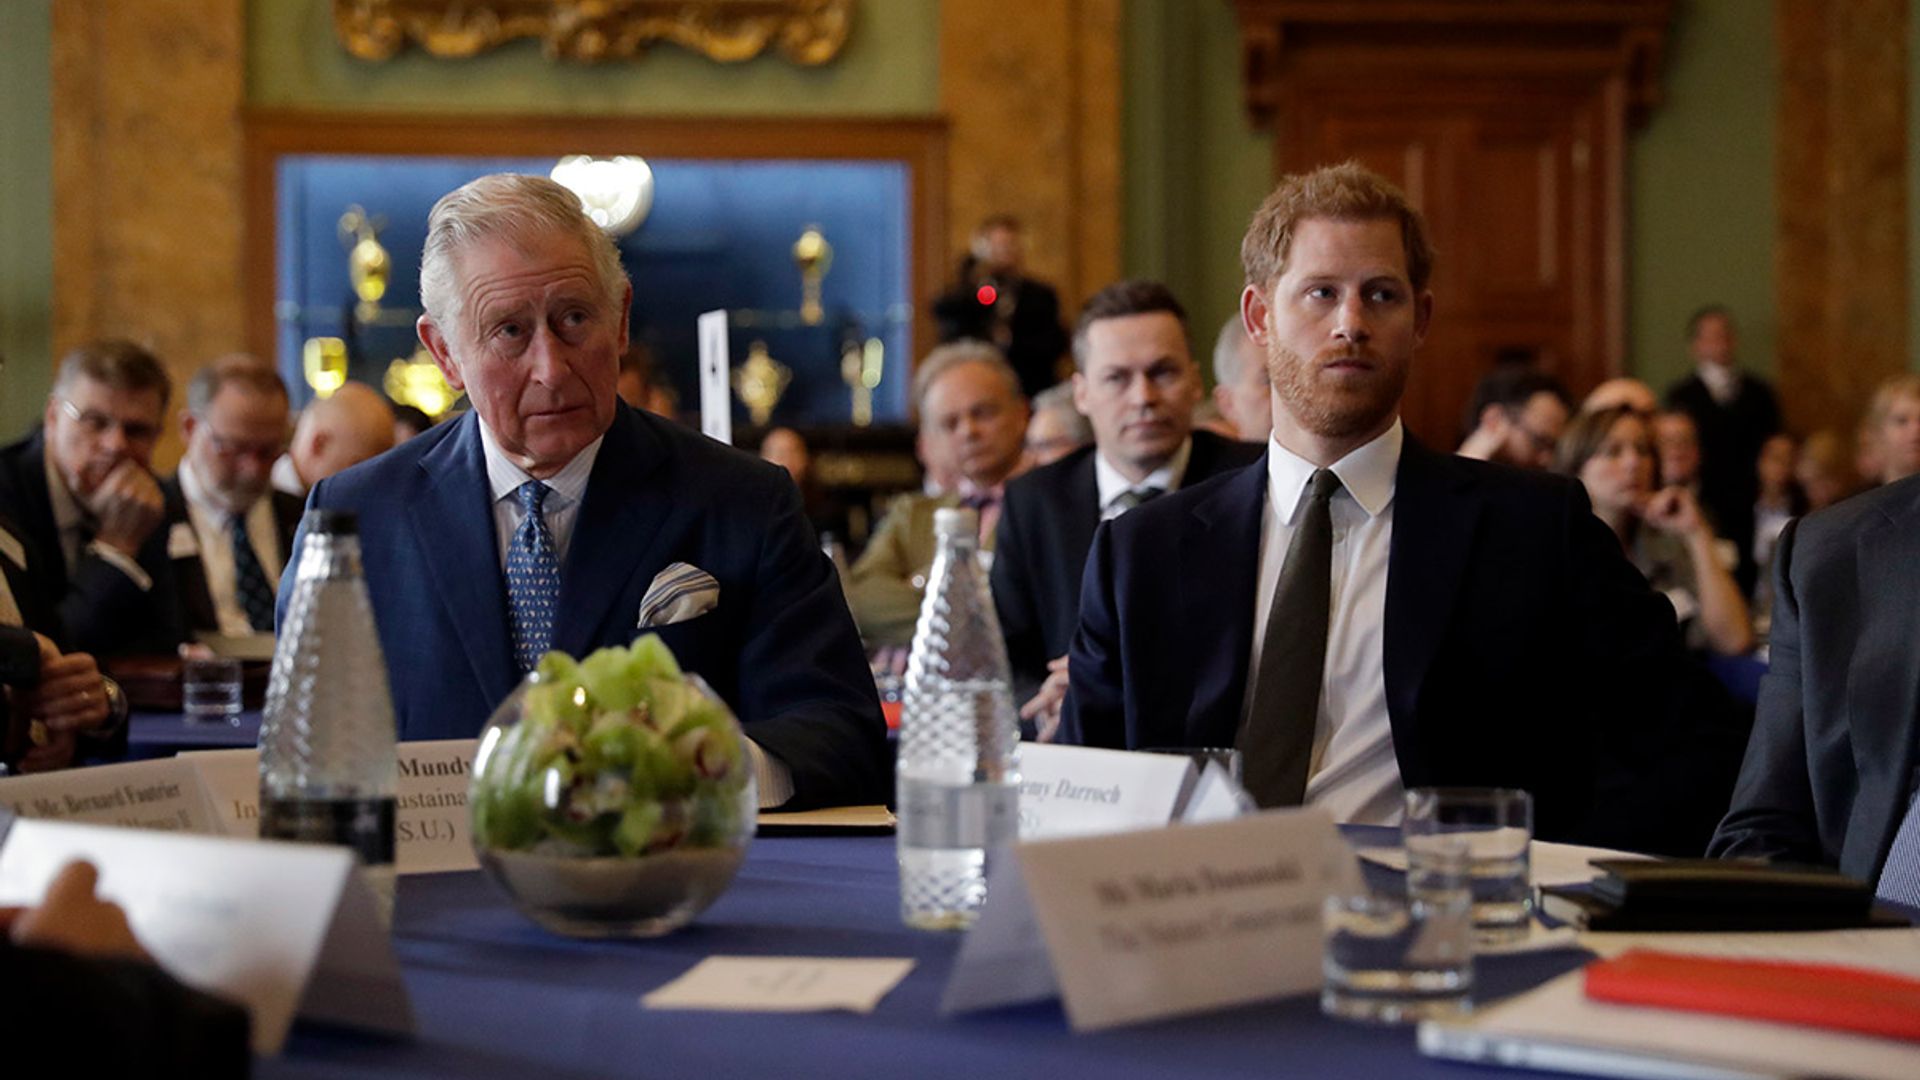 Prince Charles quizzed about Prince Harry's controversial podcast interview by reporter